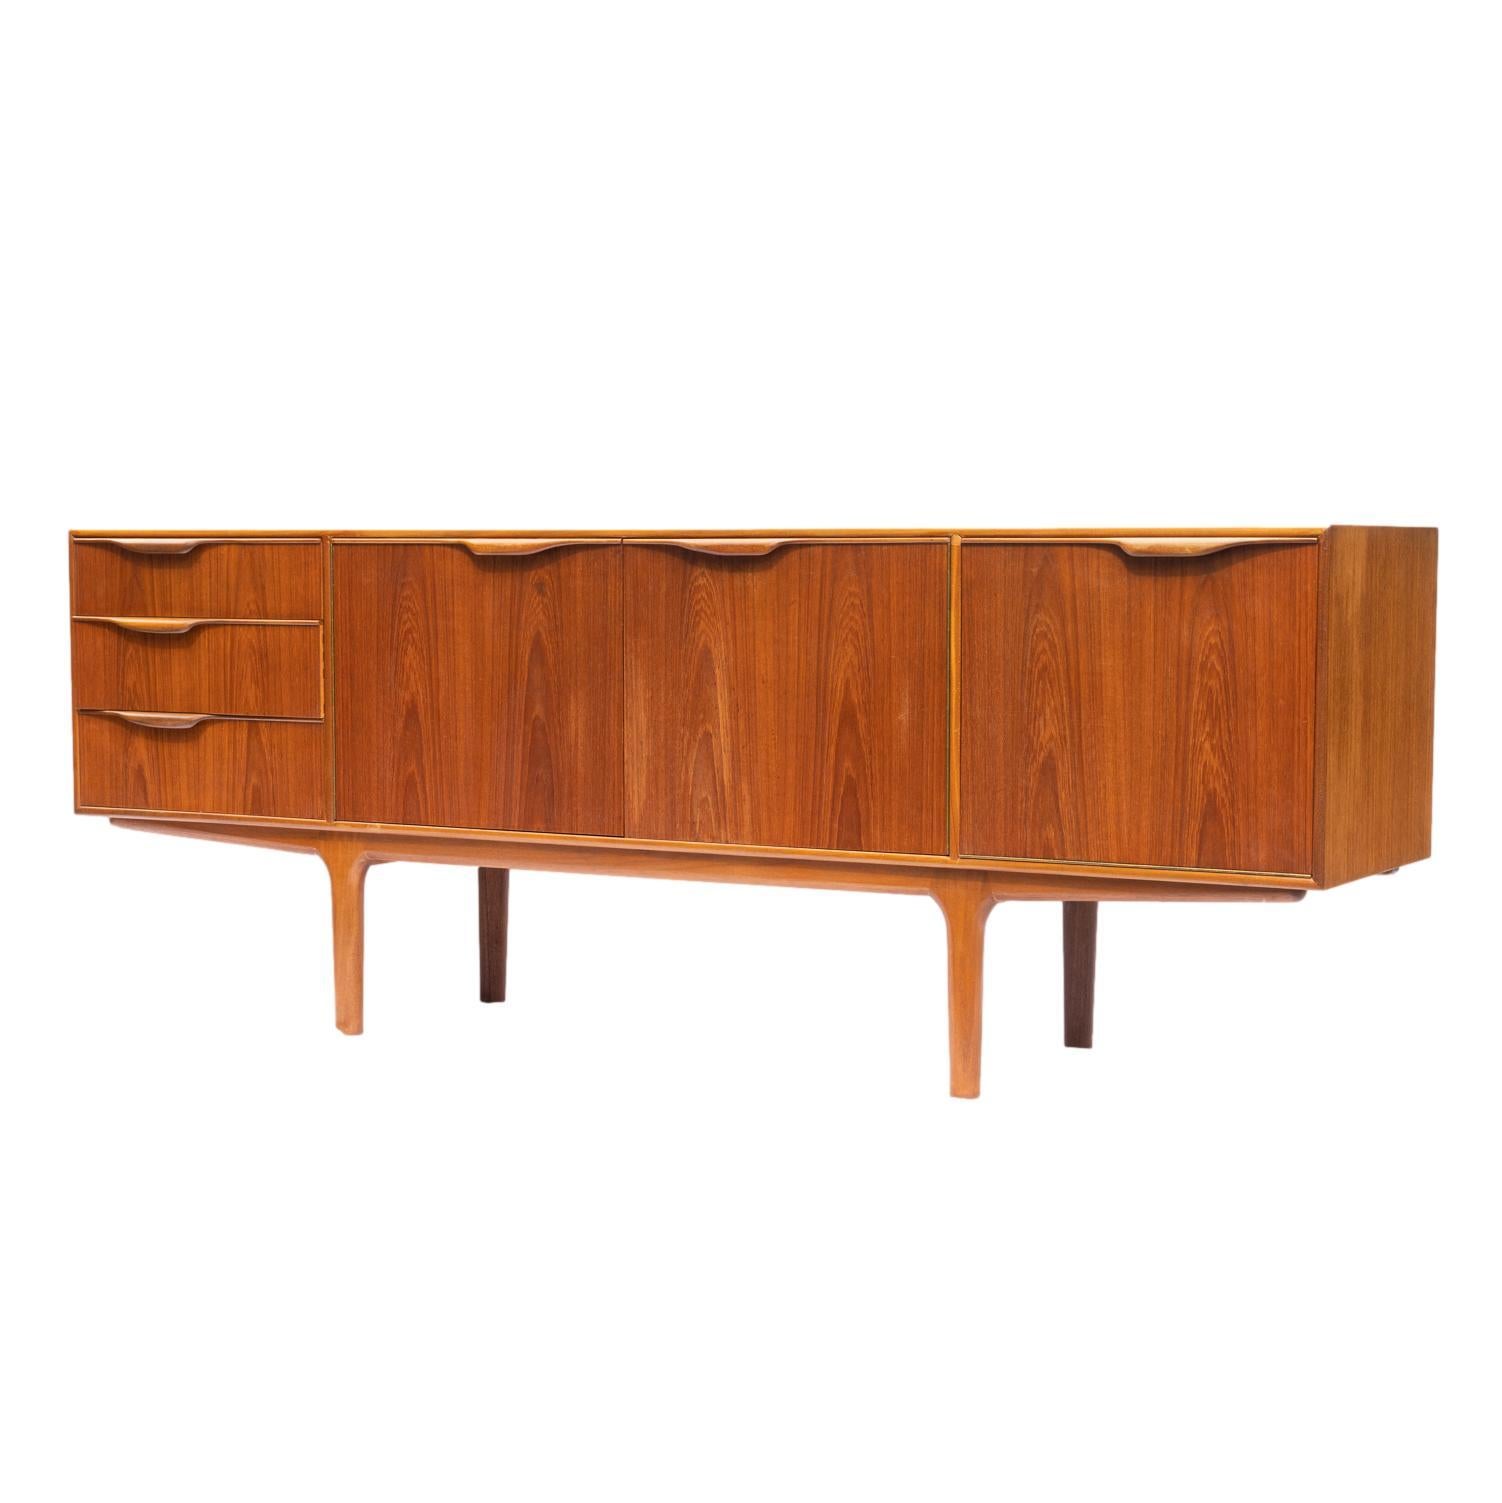 Mid-Century Modern Dunvegan Sideboard, Designed by Tom Robinson for RH McIntosh, Signed, ca. 1960